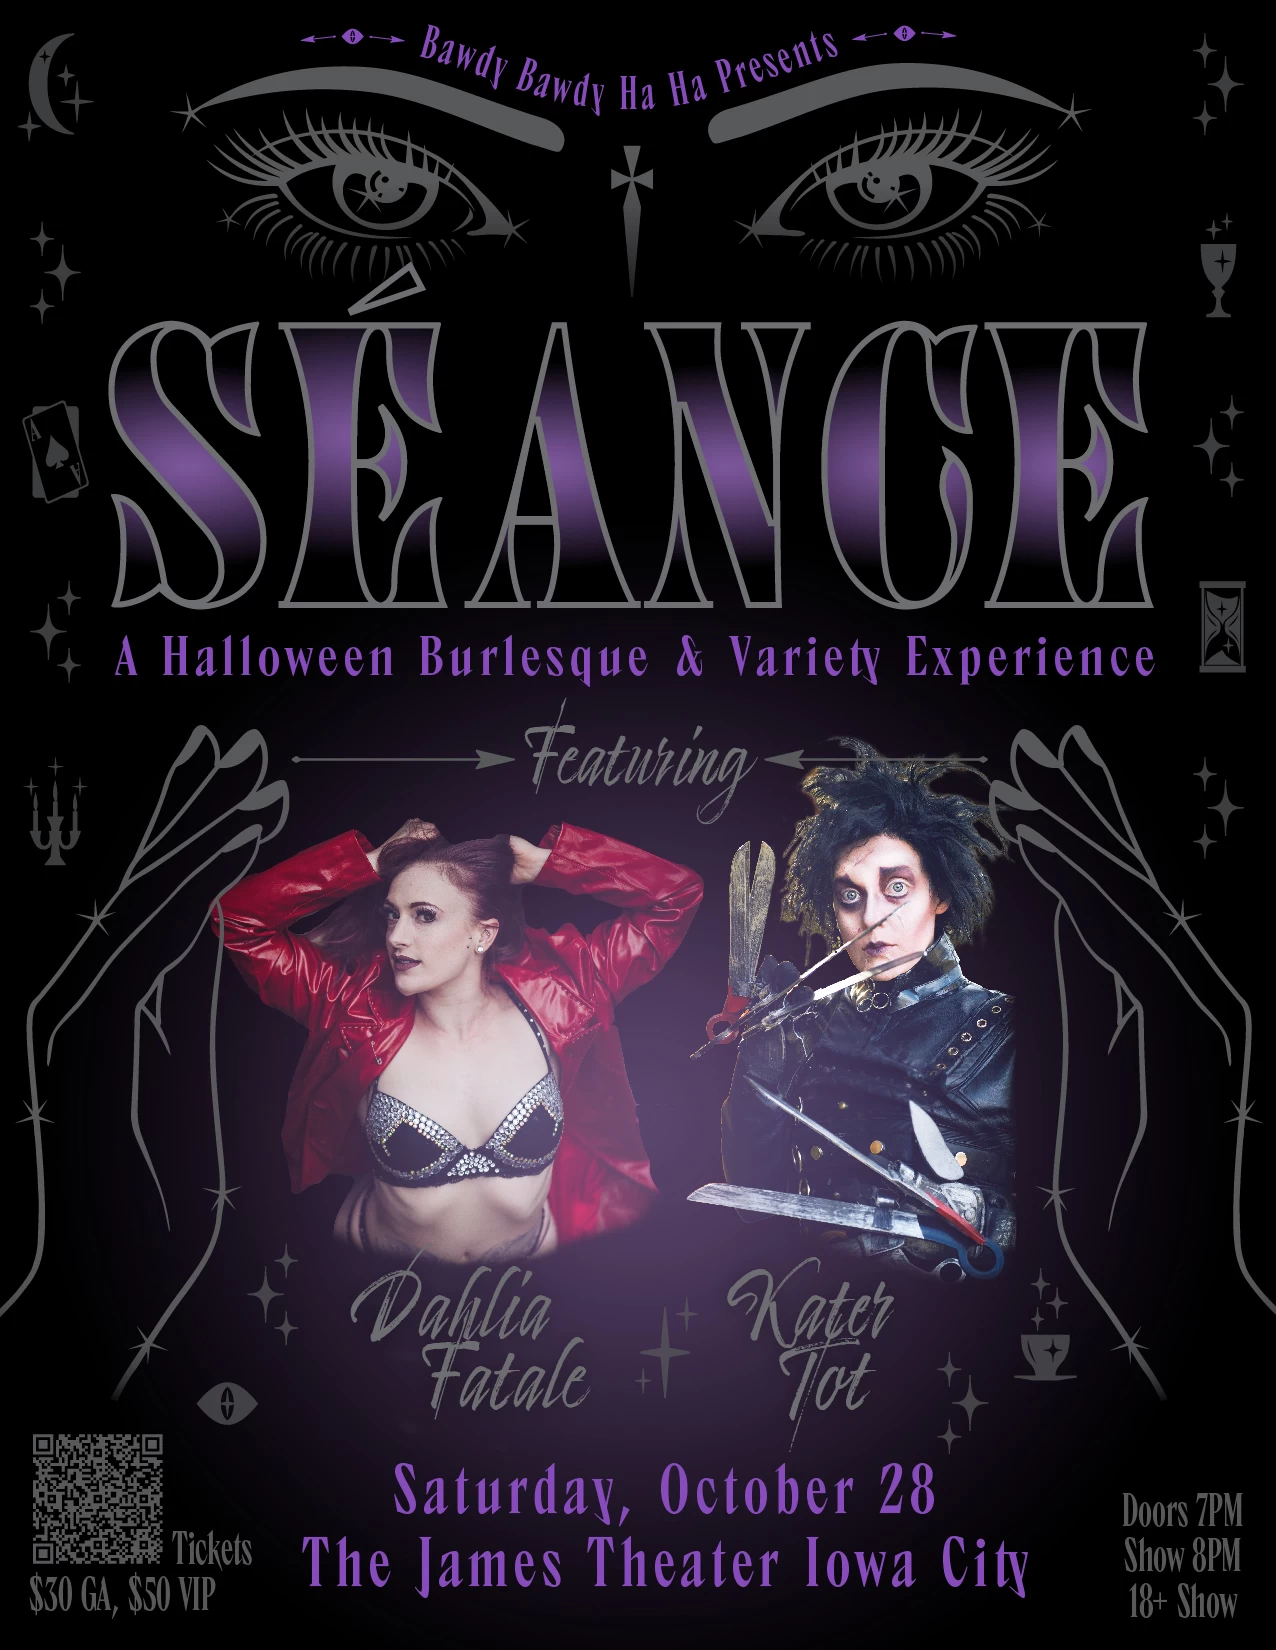 SEANCE- A Halloween Burlesque and Variety Experience